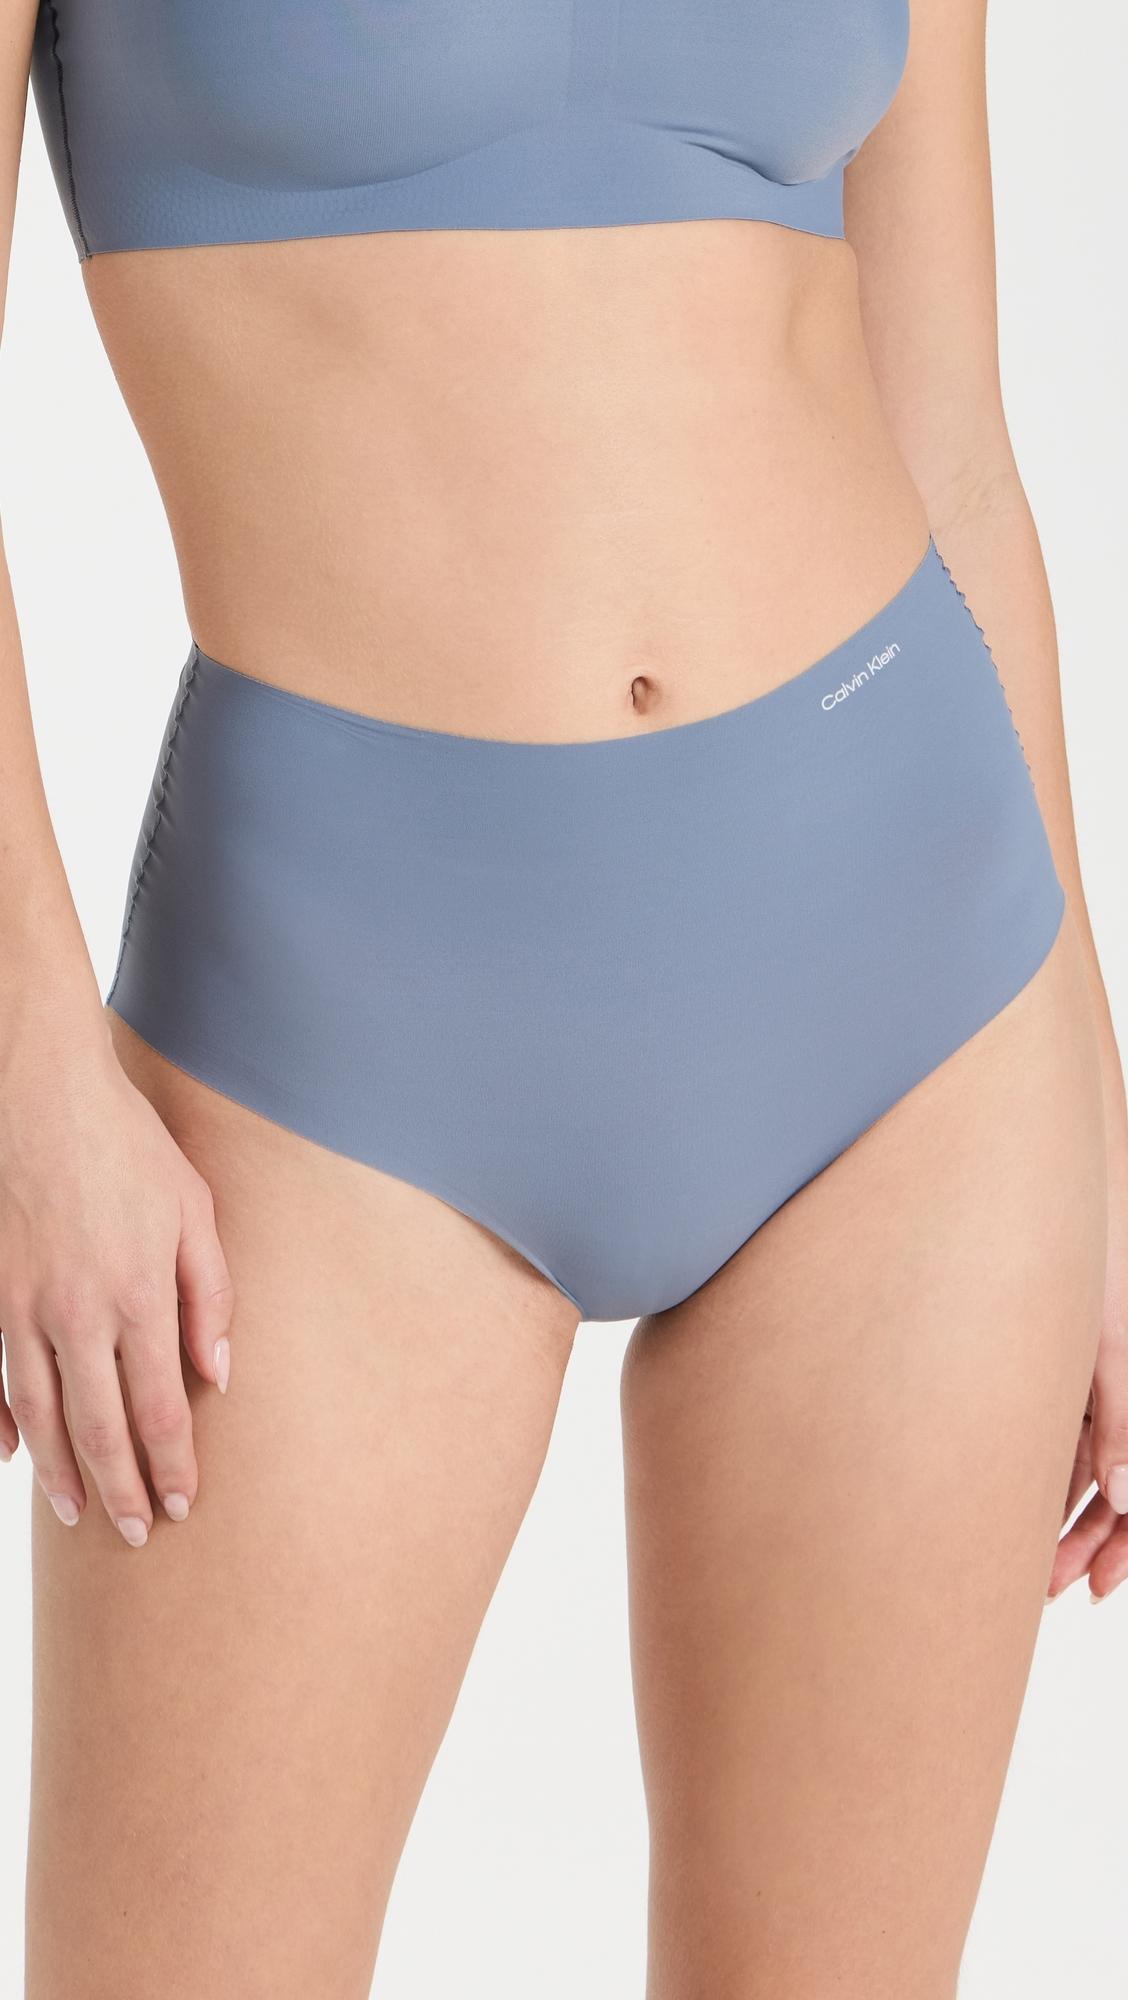 Spyder Hipsters Panties for Women